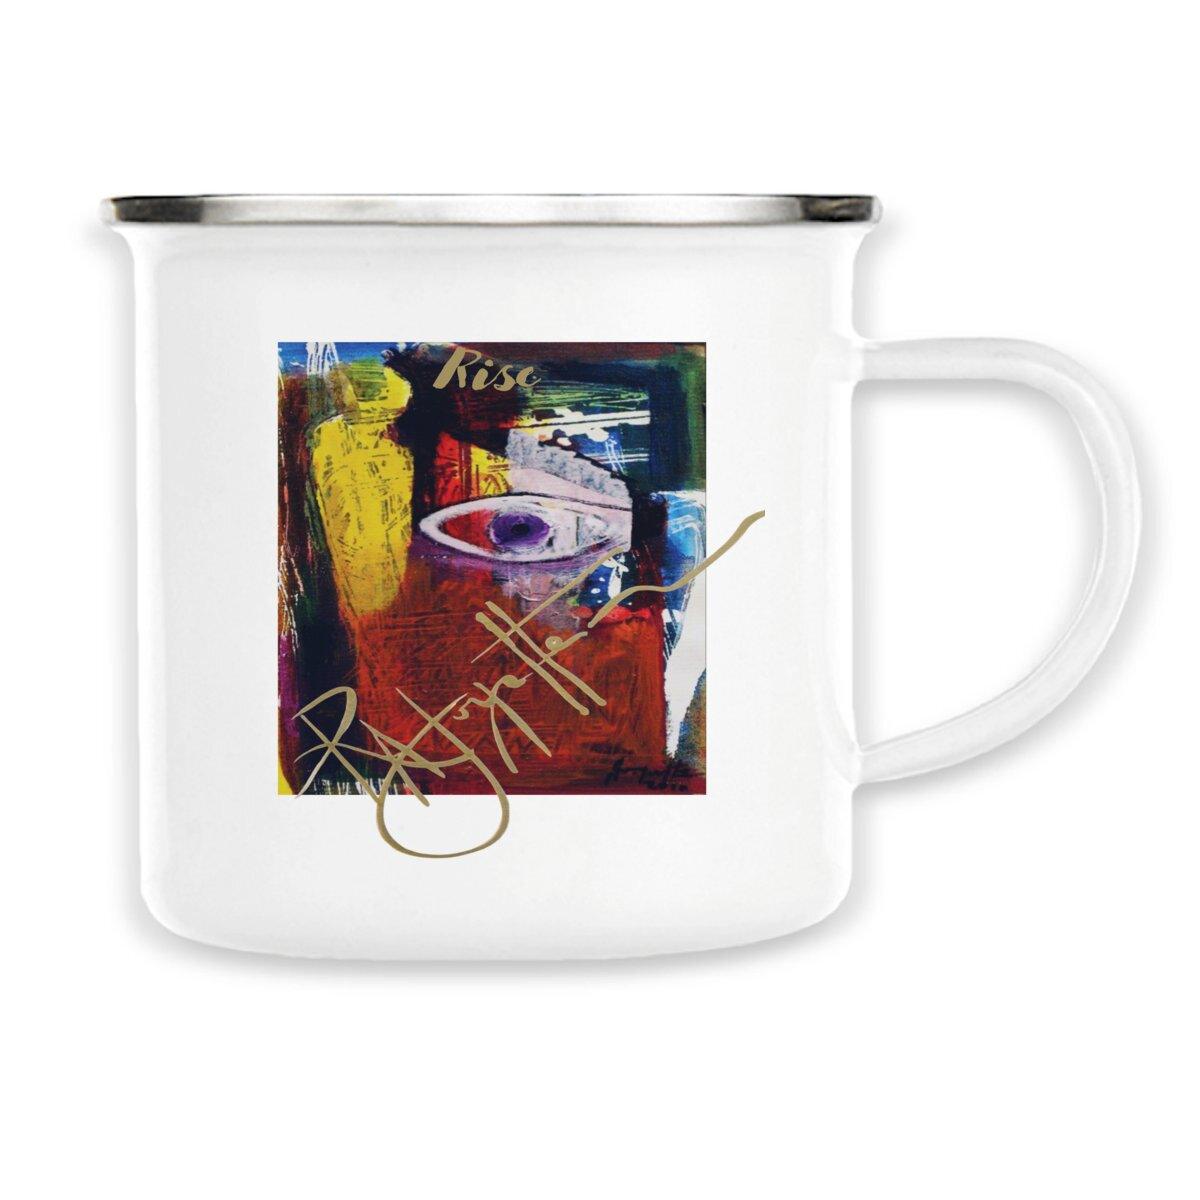 Rise! Dedication to Haiti Earthquake Disaster Premium Enamel Mug by Robert Joyette, featuring art as activism, vintage style, hand wash recommended, not microwave safe.